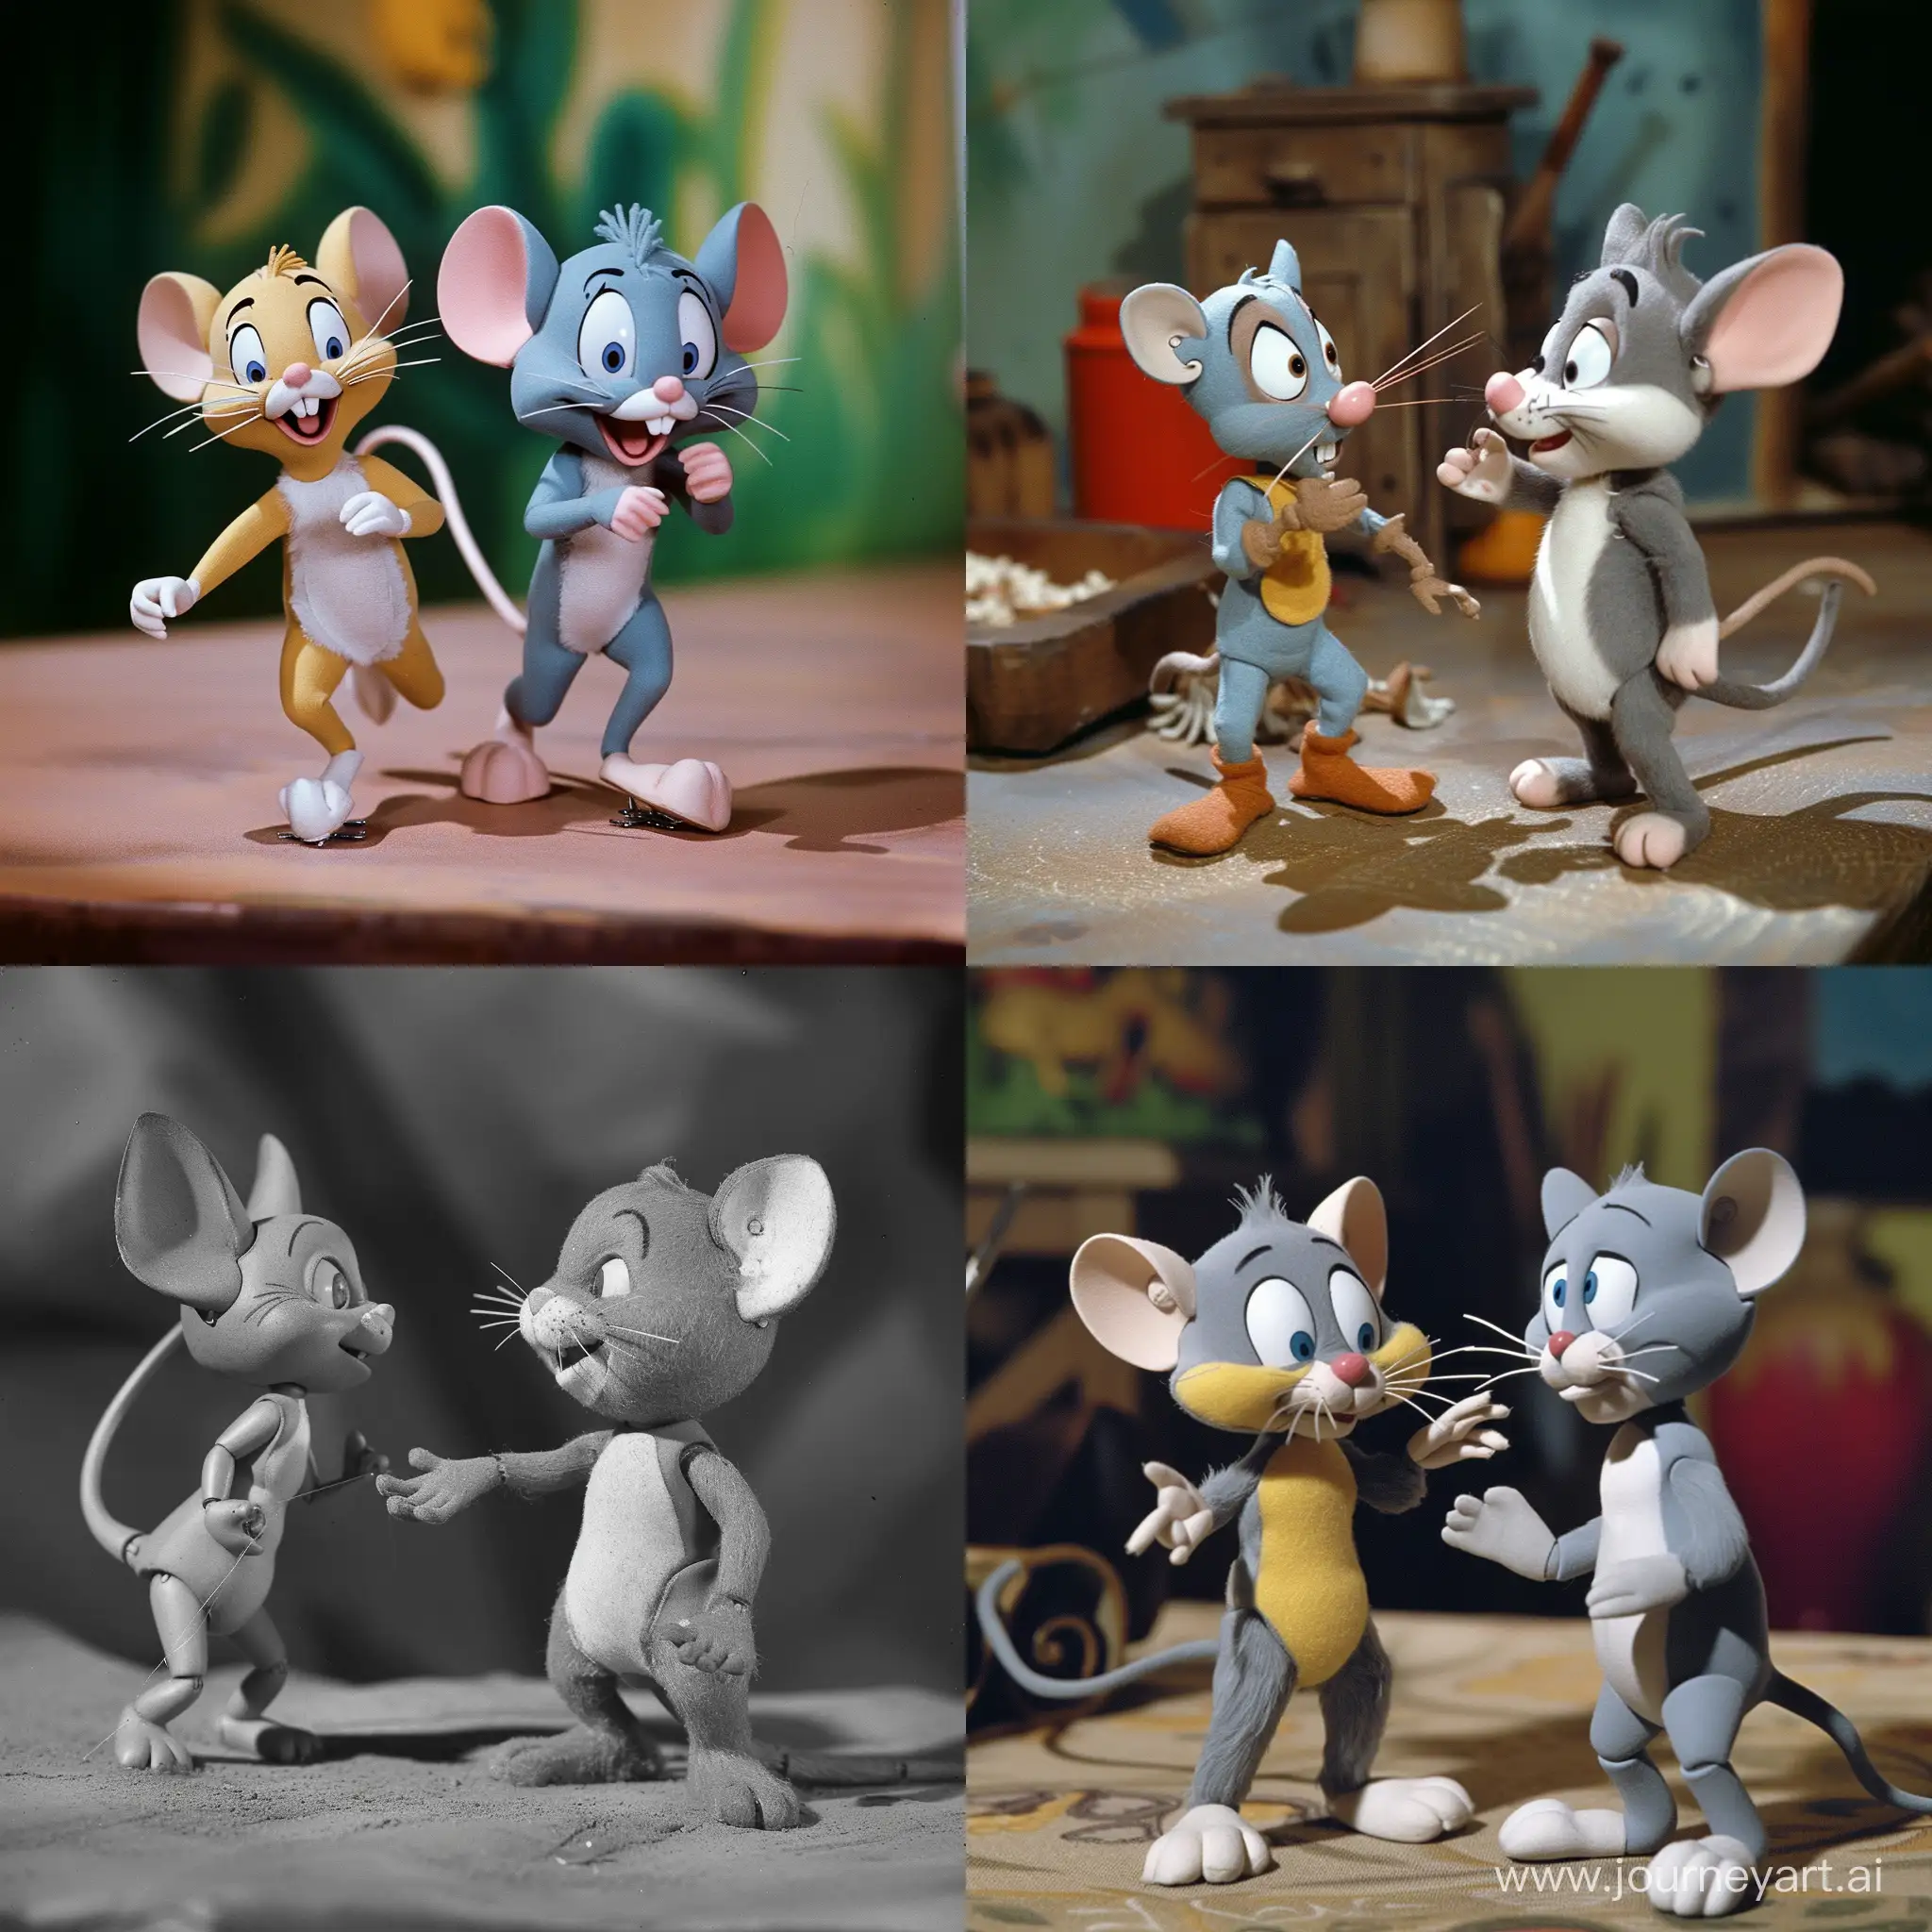 Tom and jerry, 1950s stop motion film